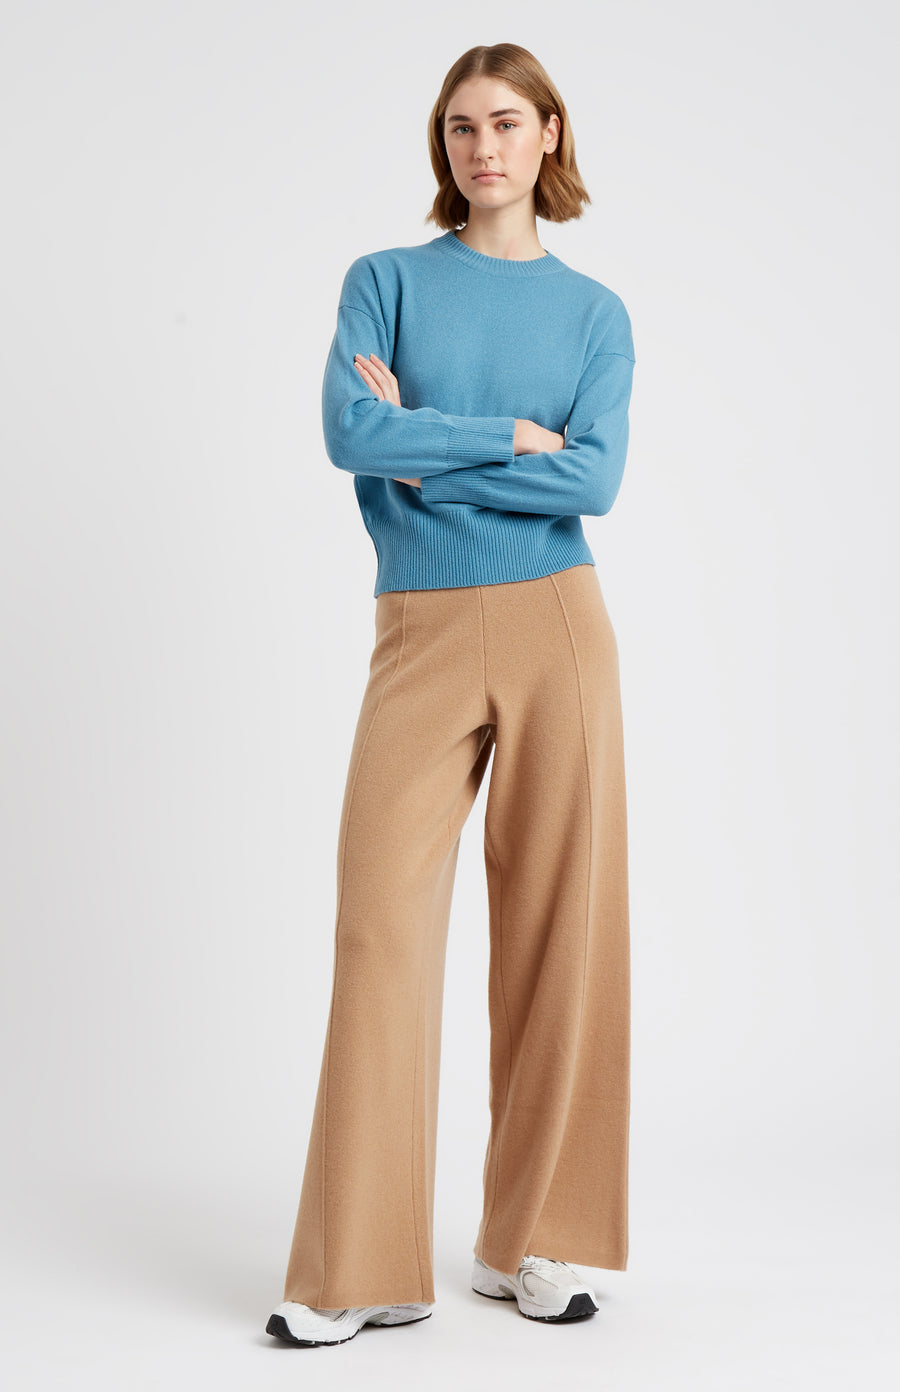 Go Your Way - Super Soft Rib Knit Trousers for Women | Roxy